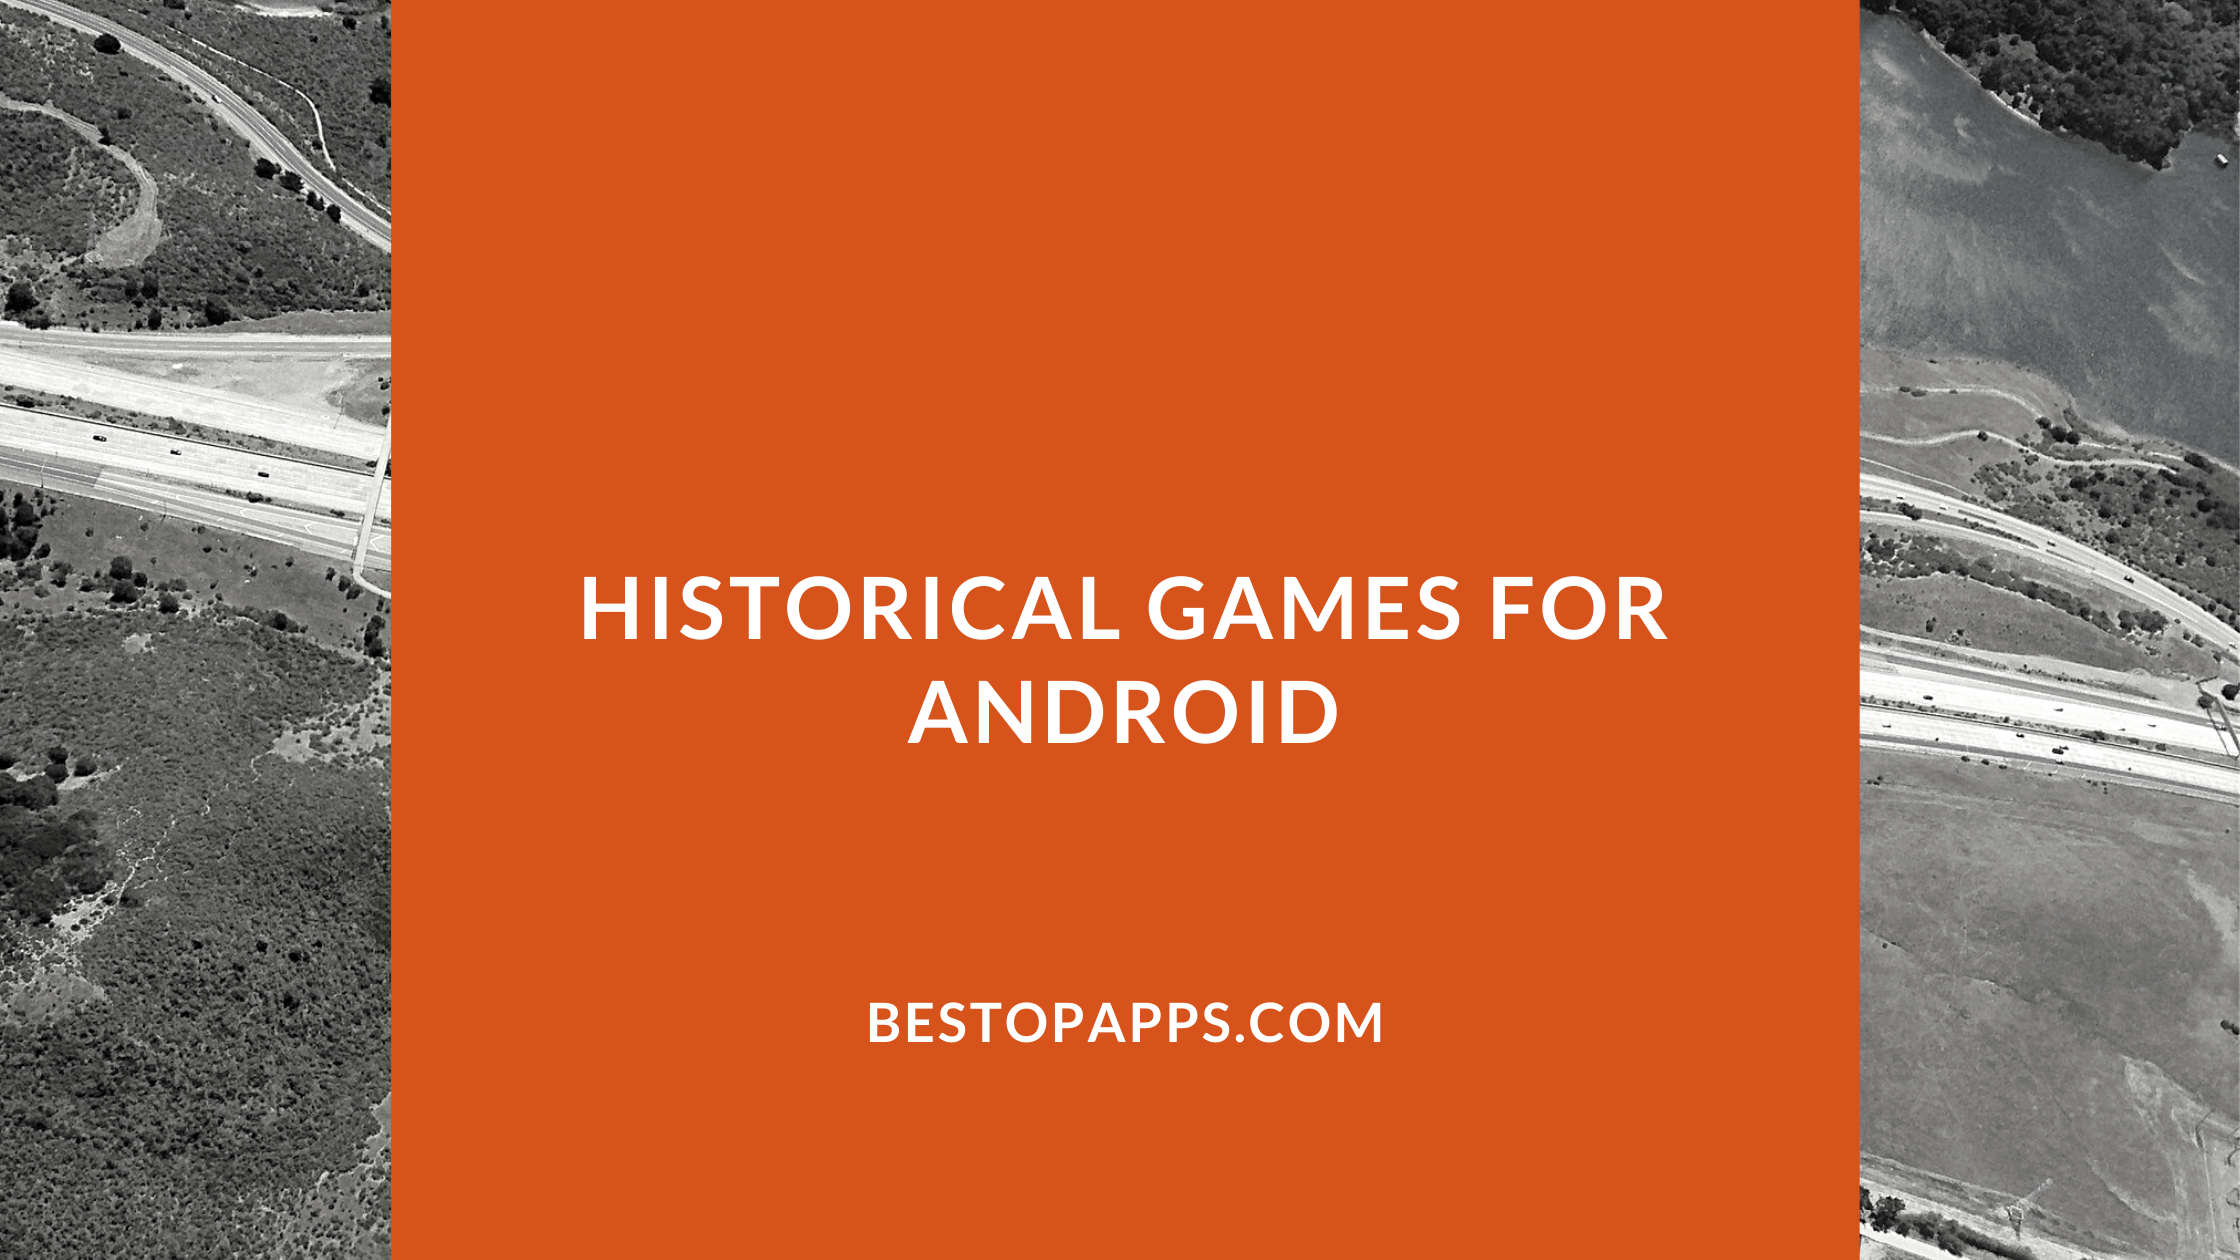 Historical Games for Android